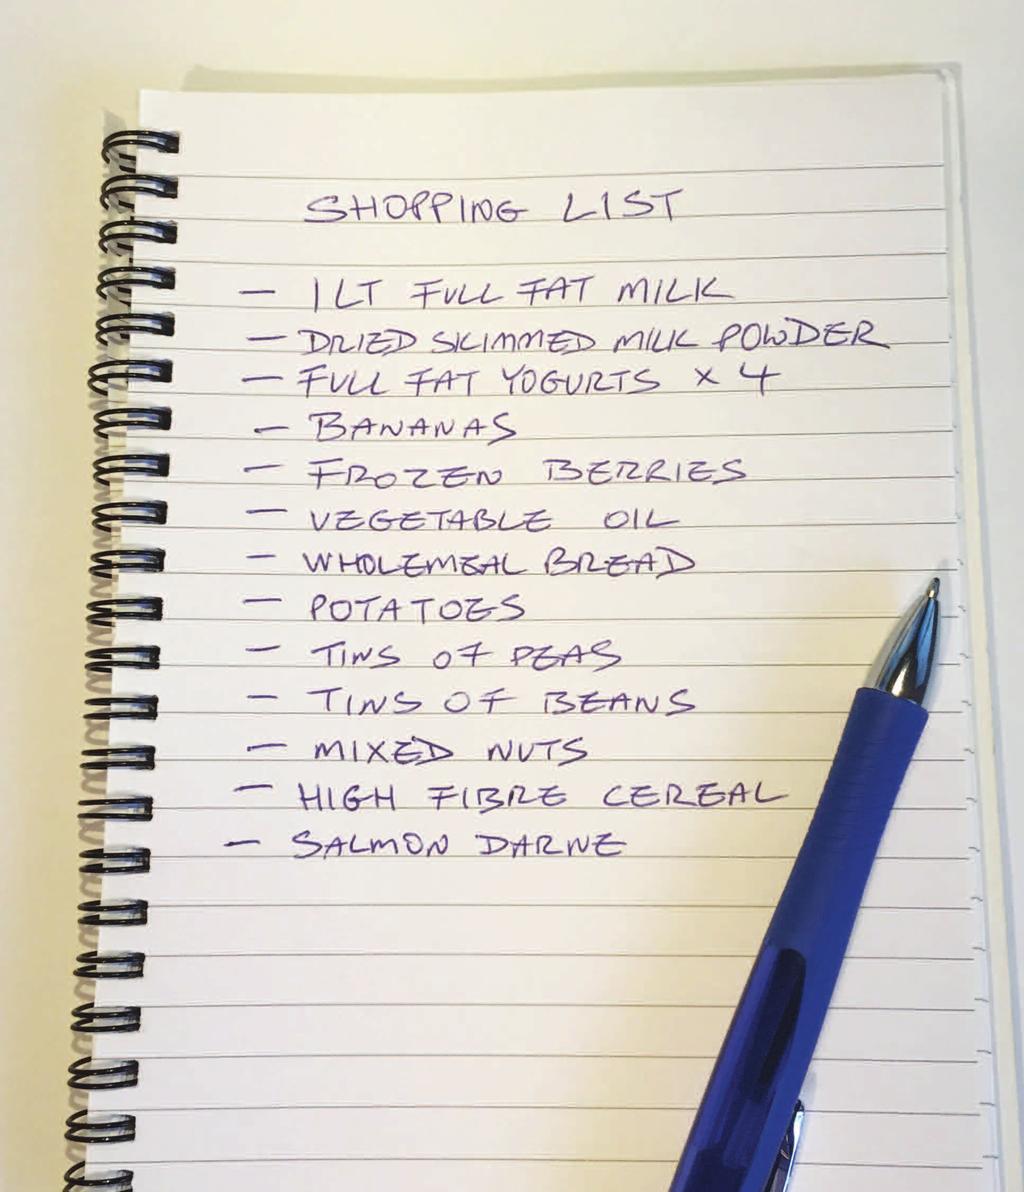 A shopping list for